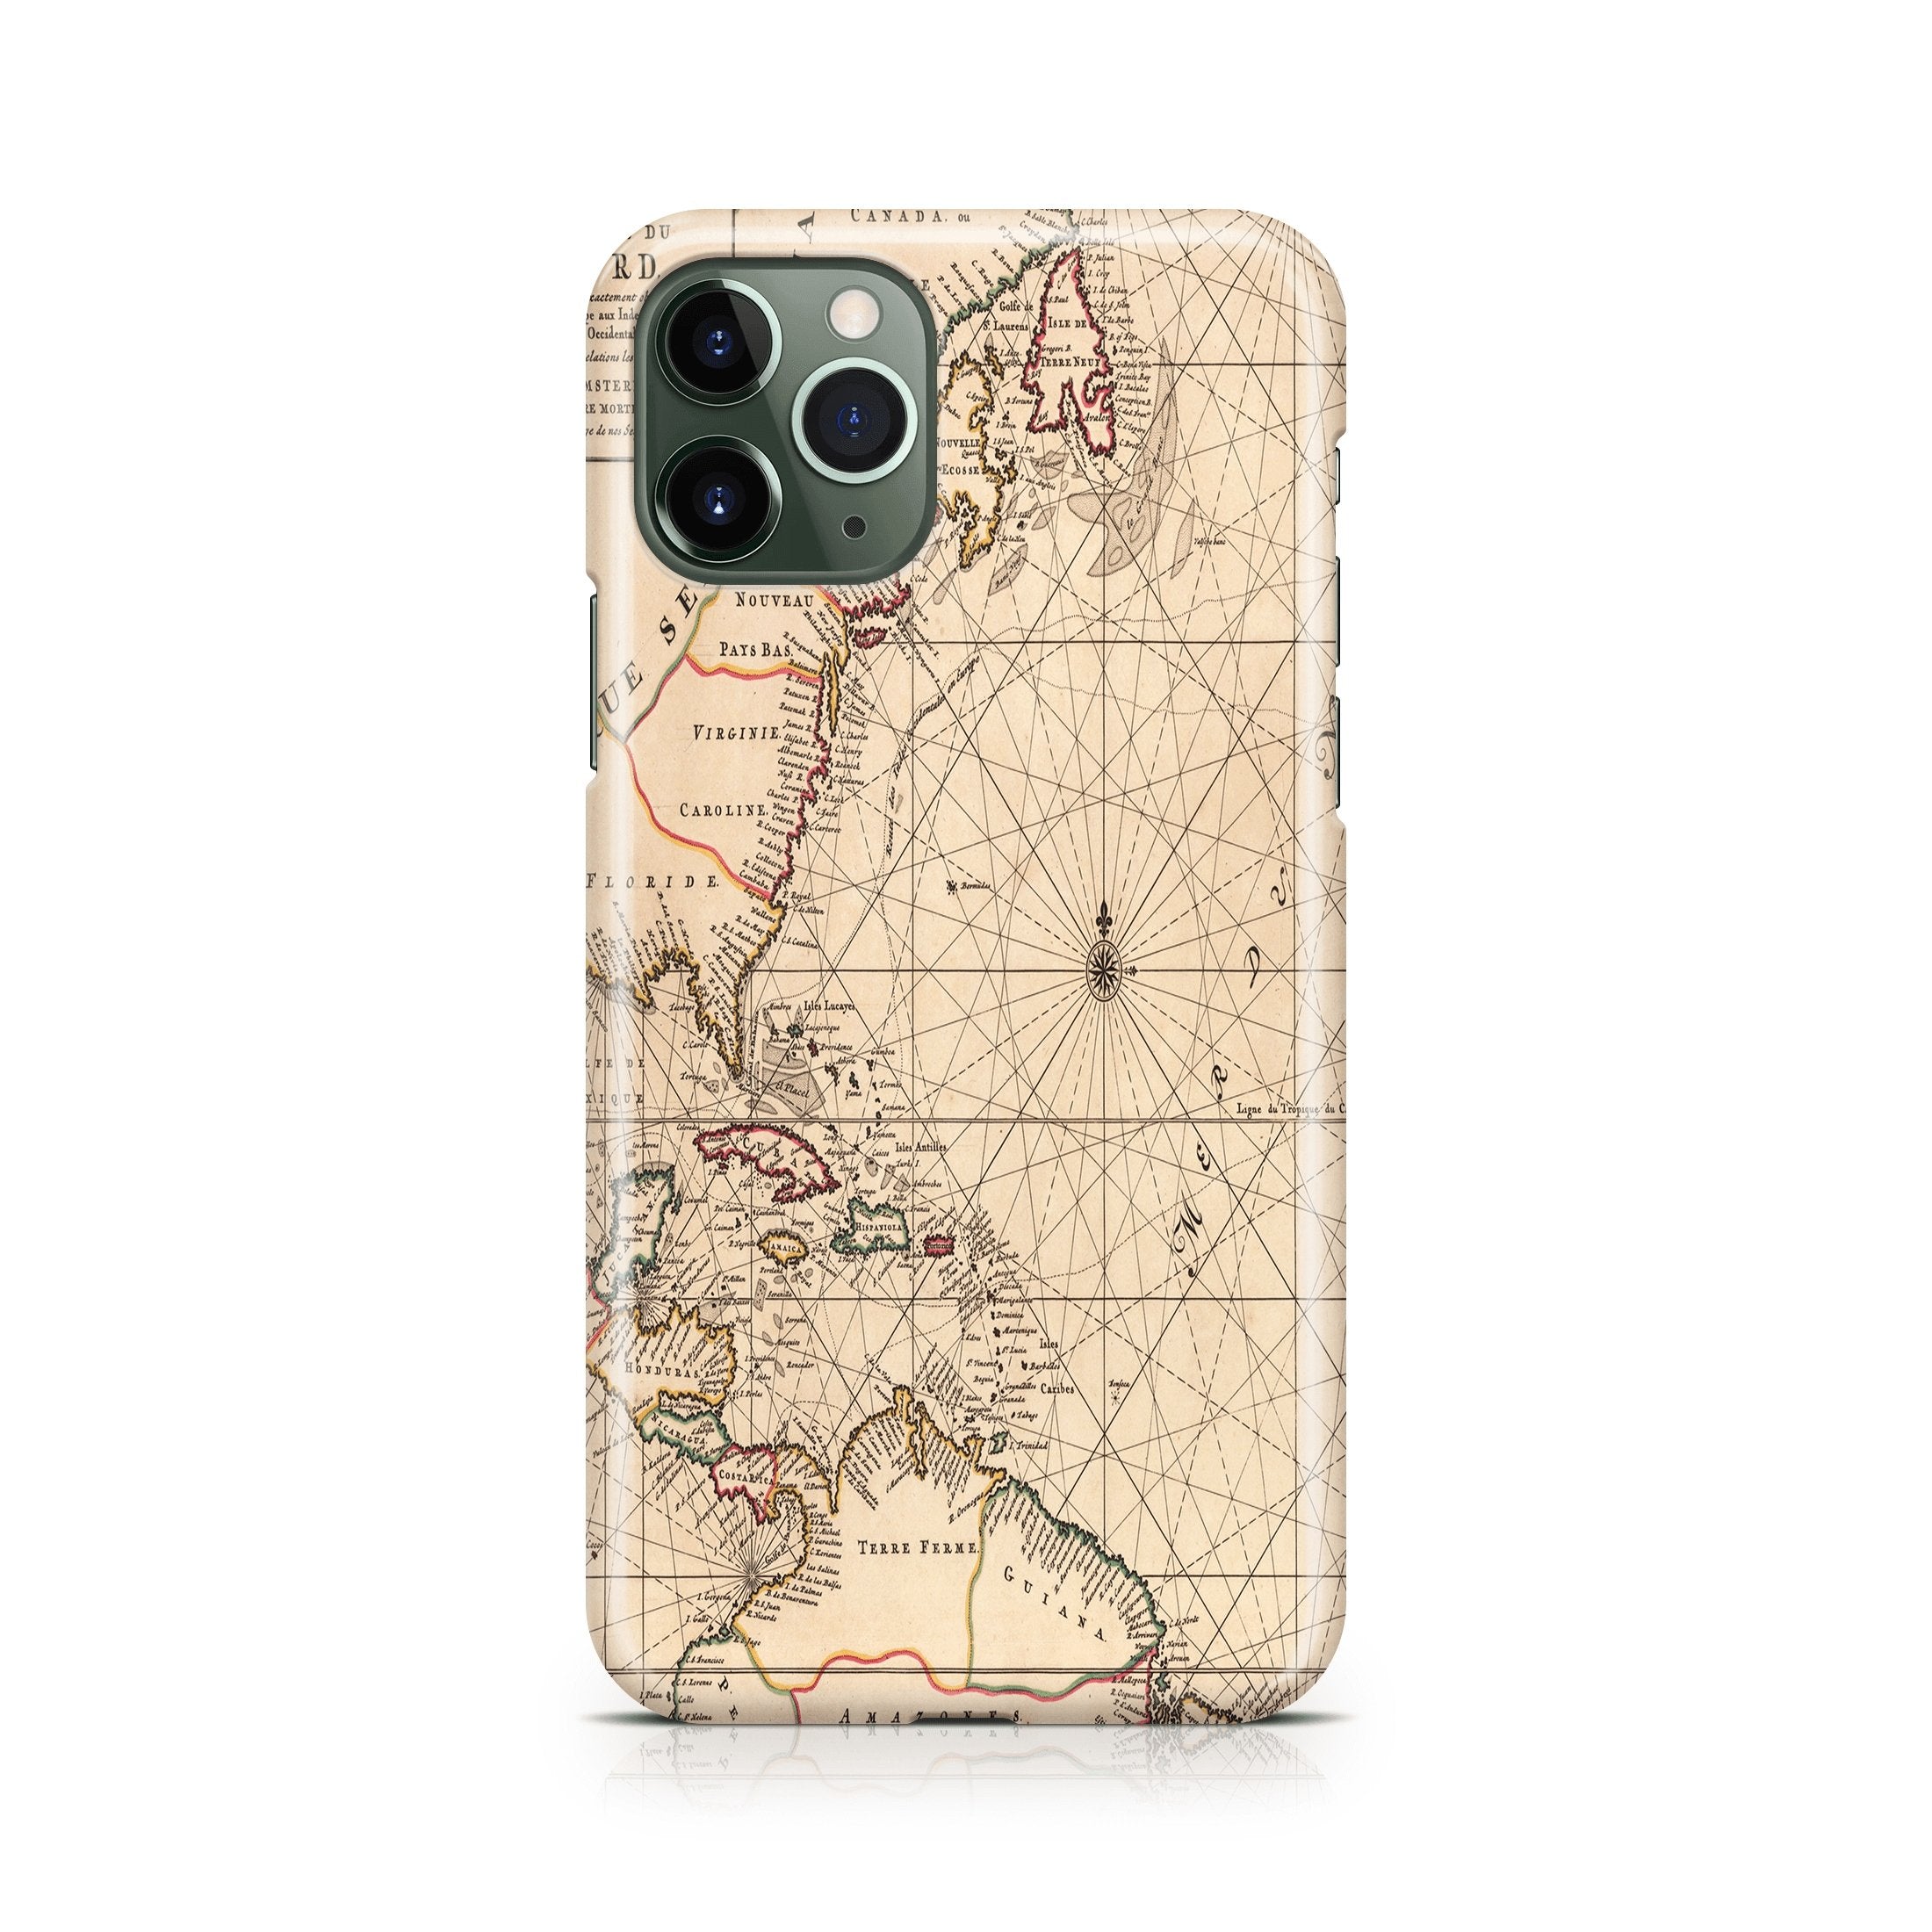 Explorer - iPhone phone case designs by CaseSwagger